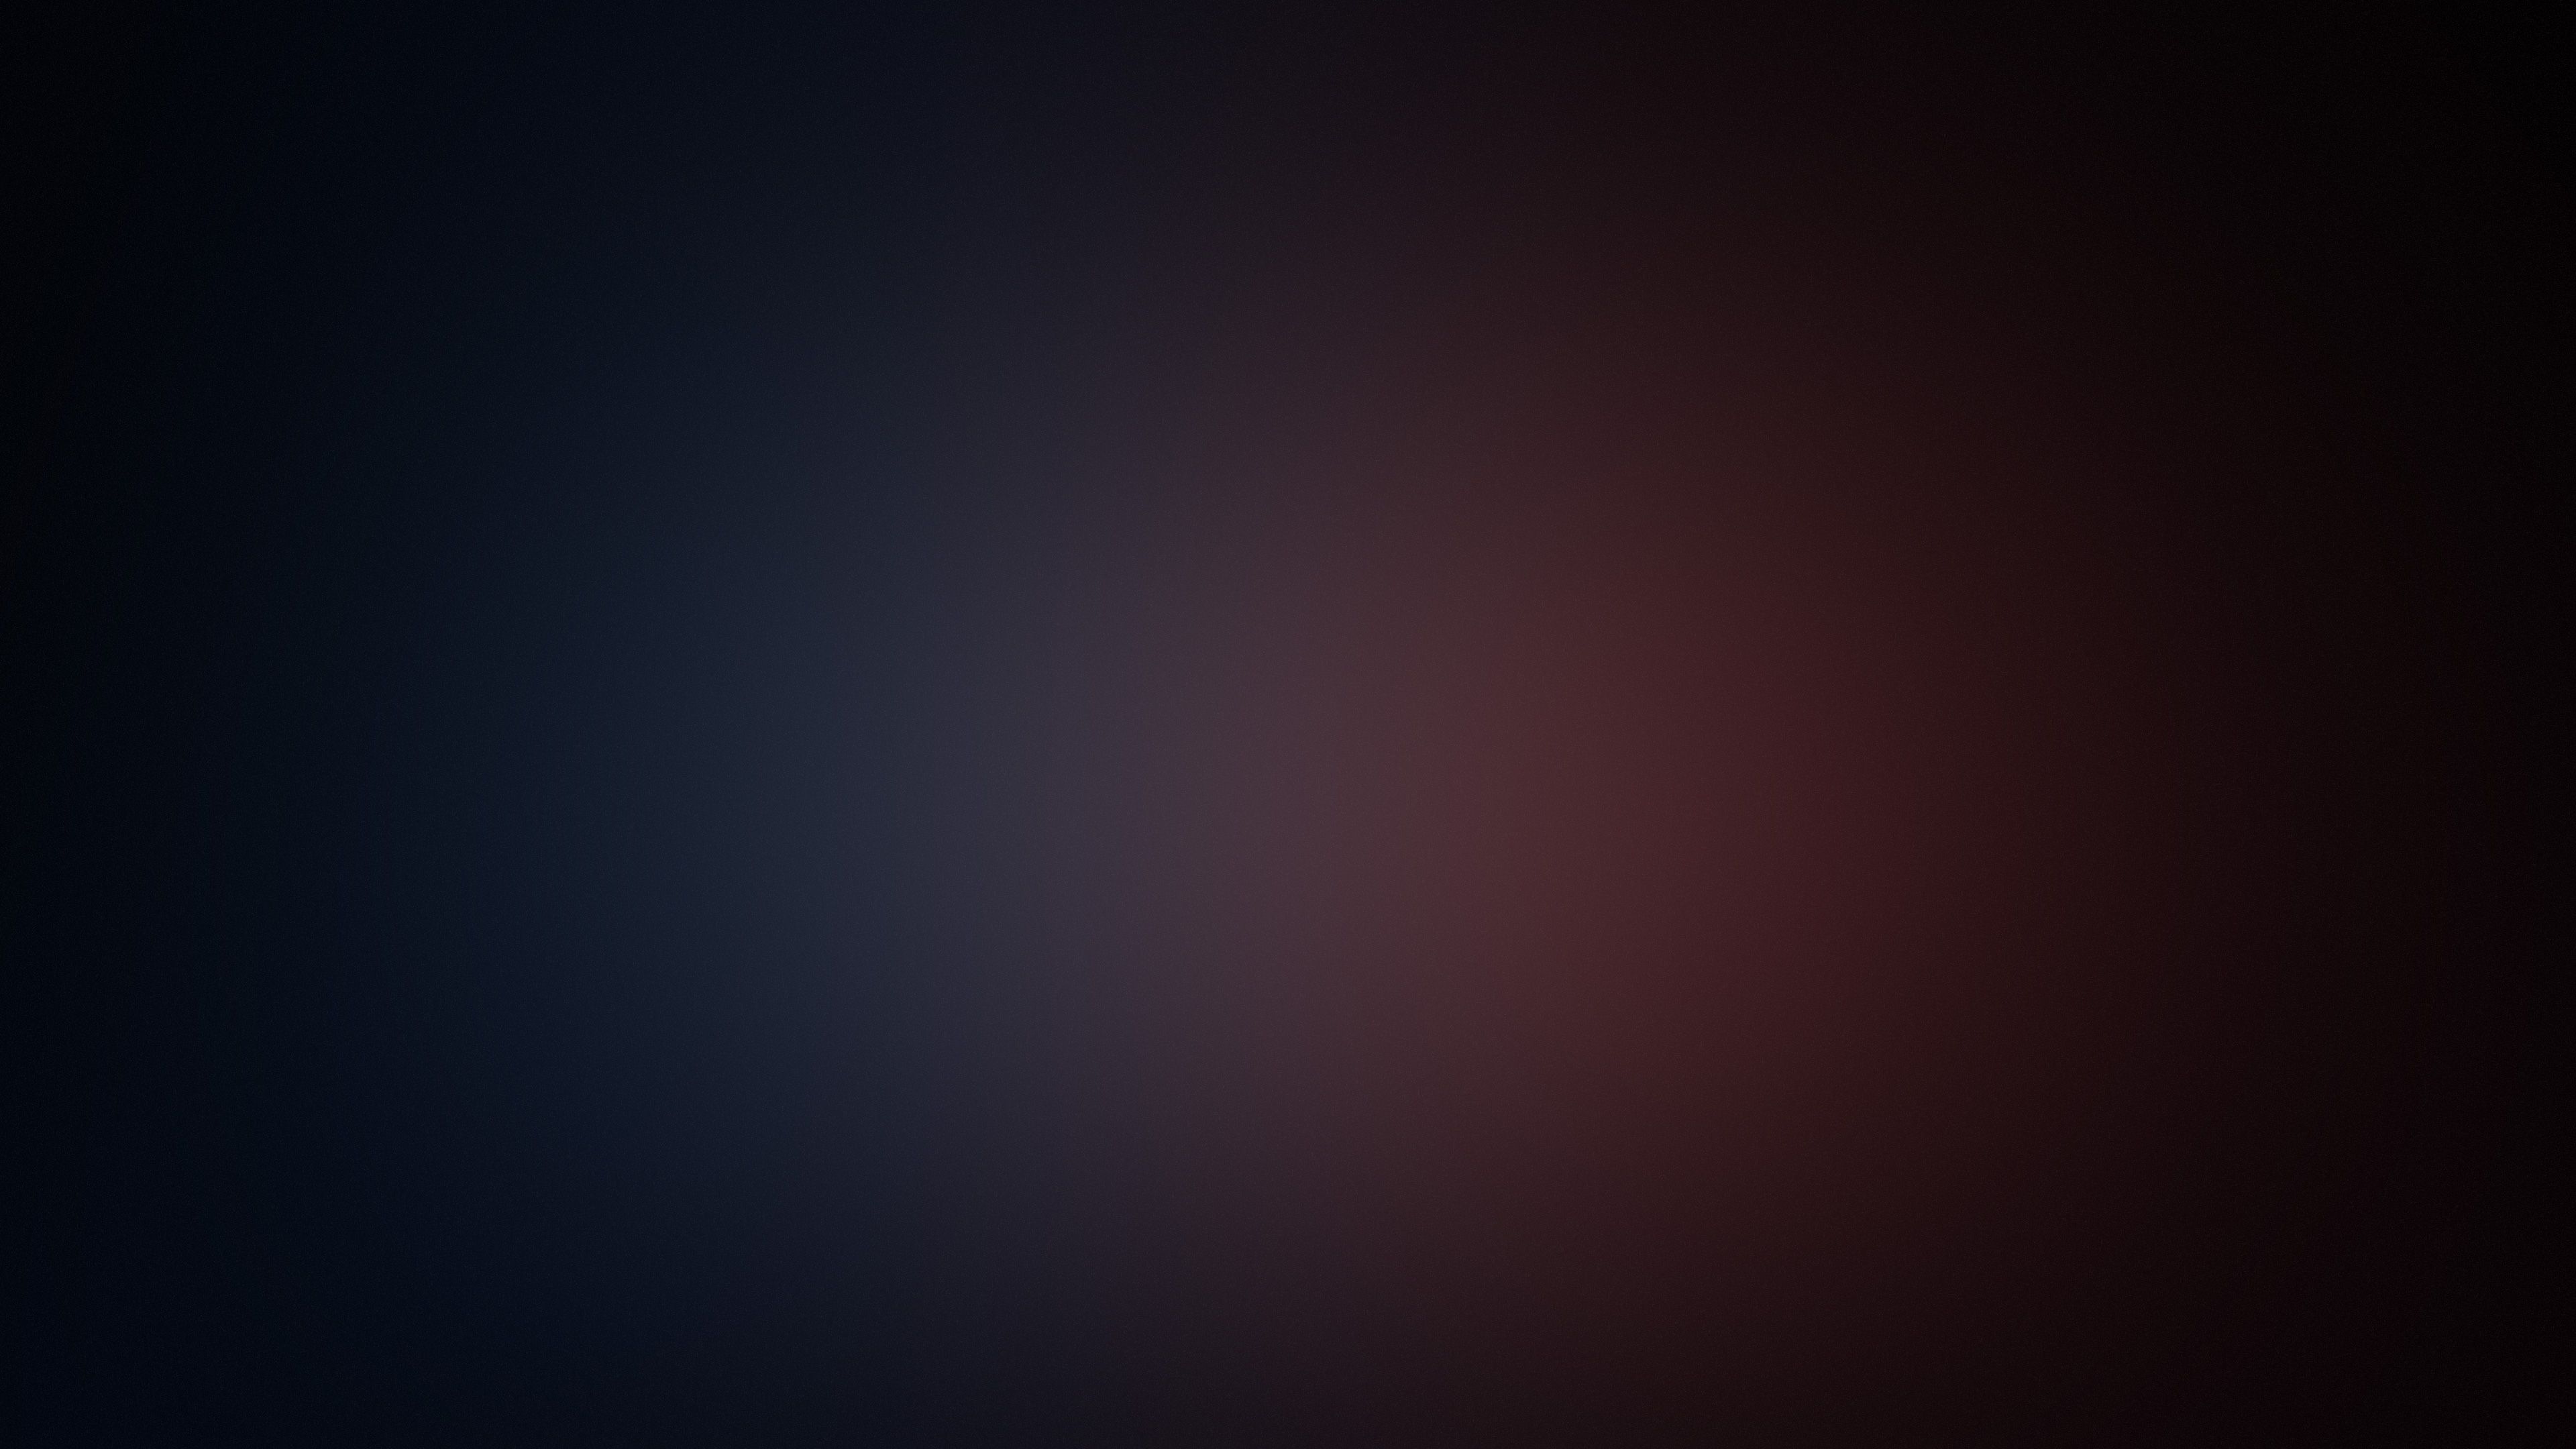 Simple Subtle Abstract Dark Minimalism 4k, HD Artist, 4k Wallpaper, Image, Background, Photo and Picture